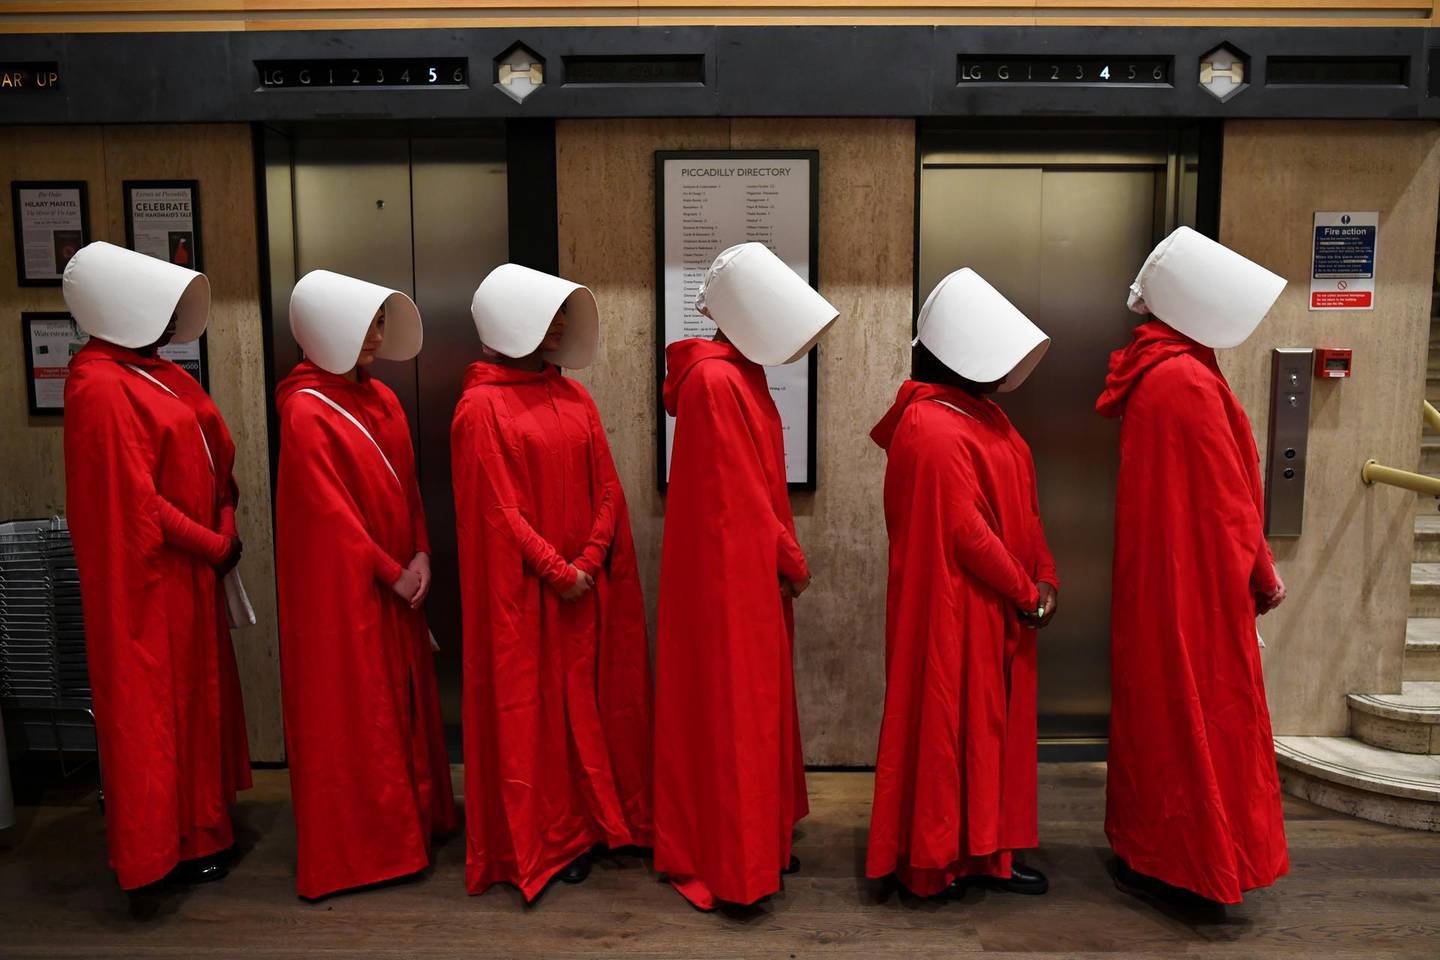 People dressed up as characters from Margaret Atwood's "The Handmaid's Tale" queue to get a copy of her new novel "The Testaments" at Waterstones bookshop in London, Britain, September 9, 2019. REUTERS/Dylan Martinez     TPX IMAGES OF THE DAY